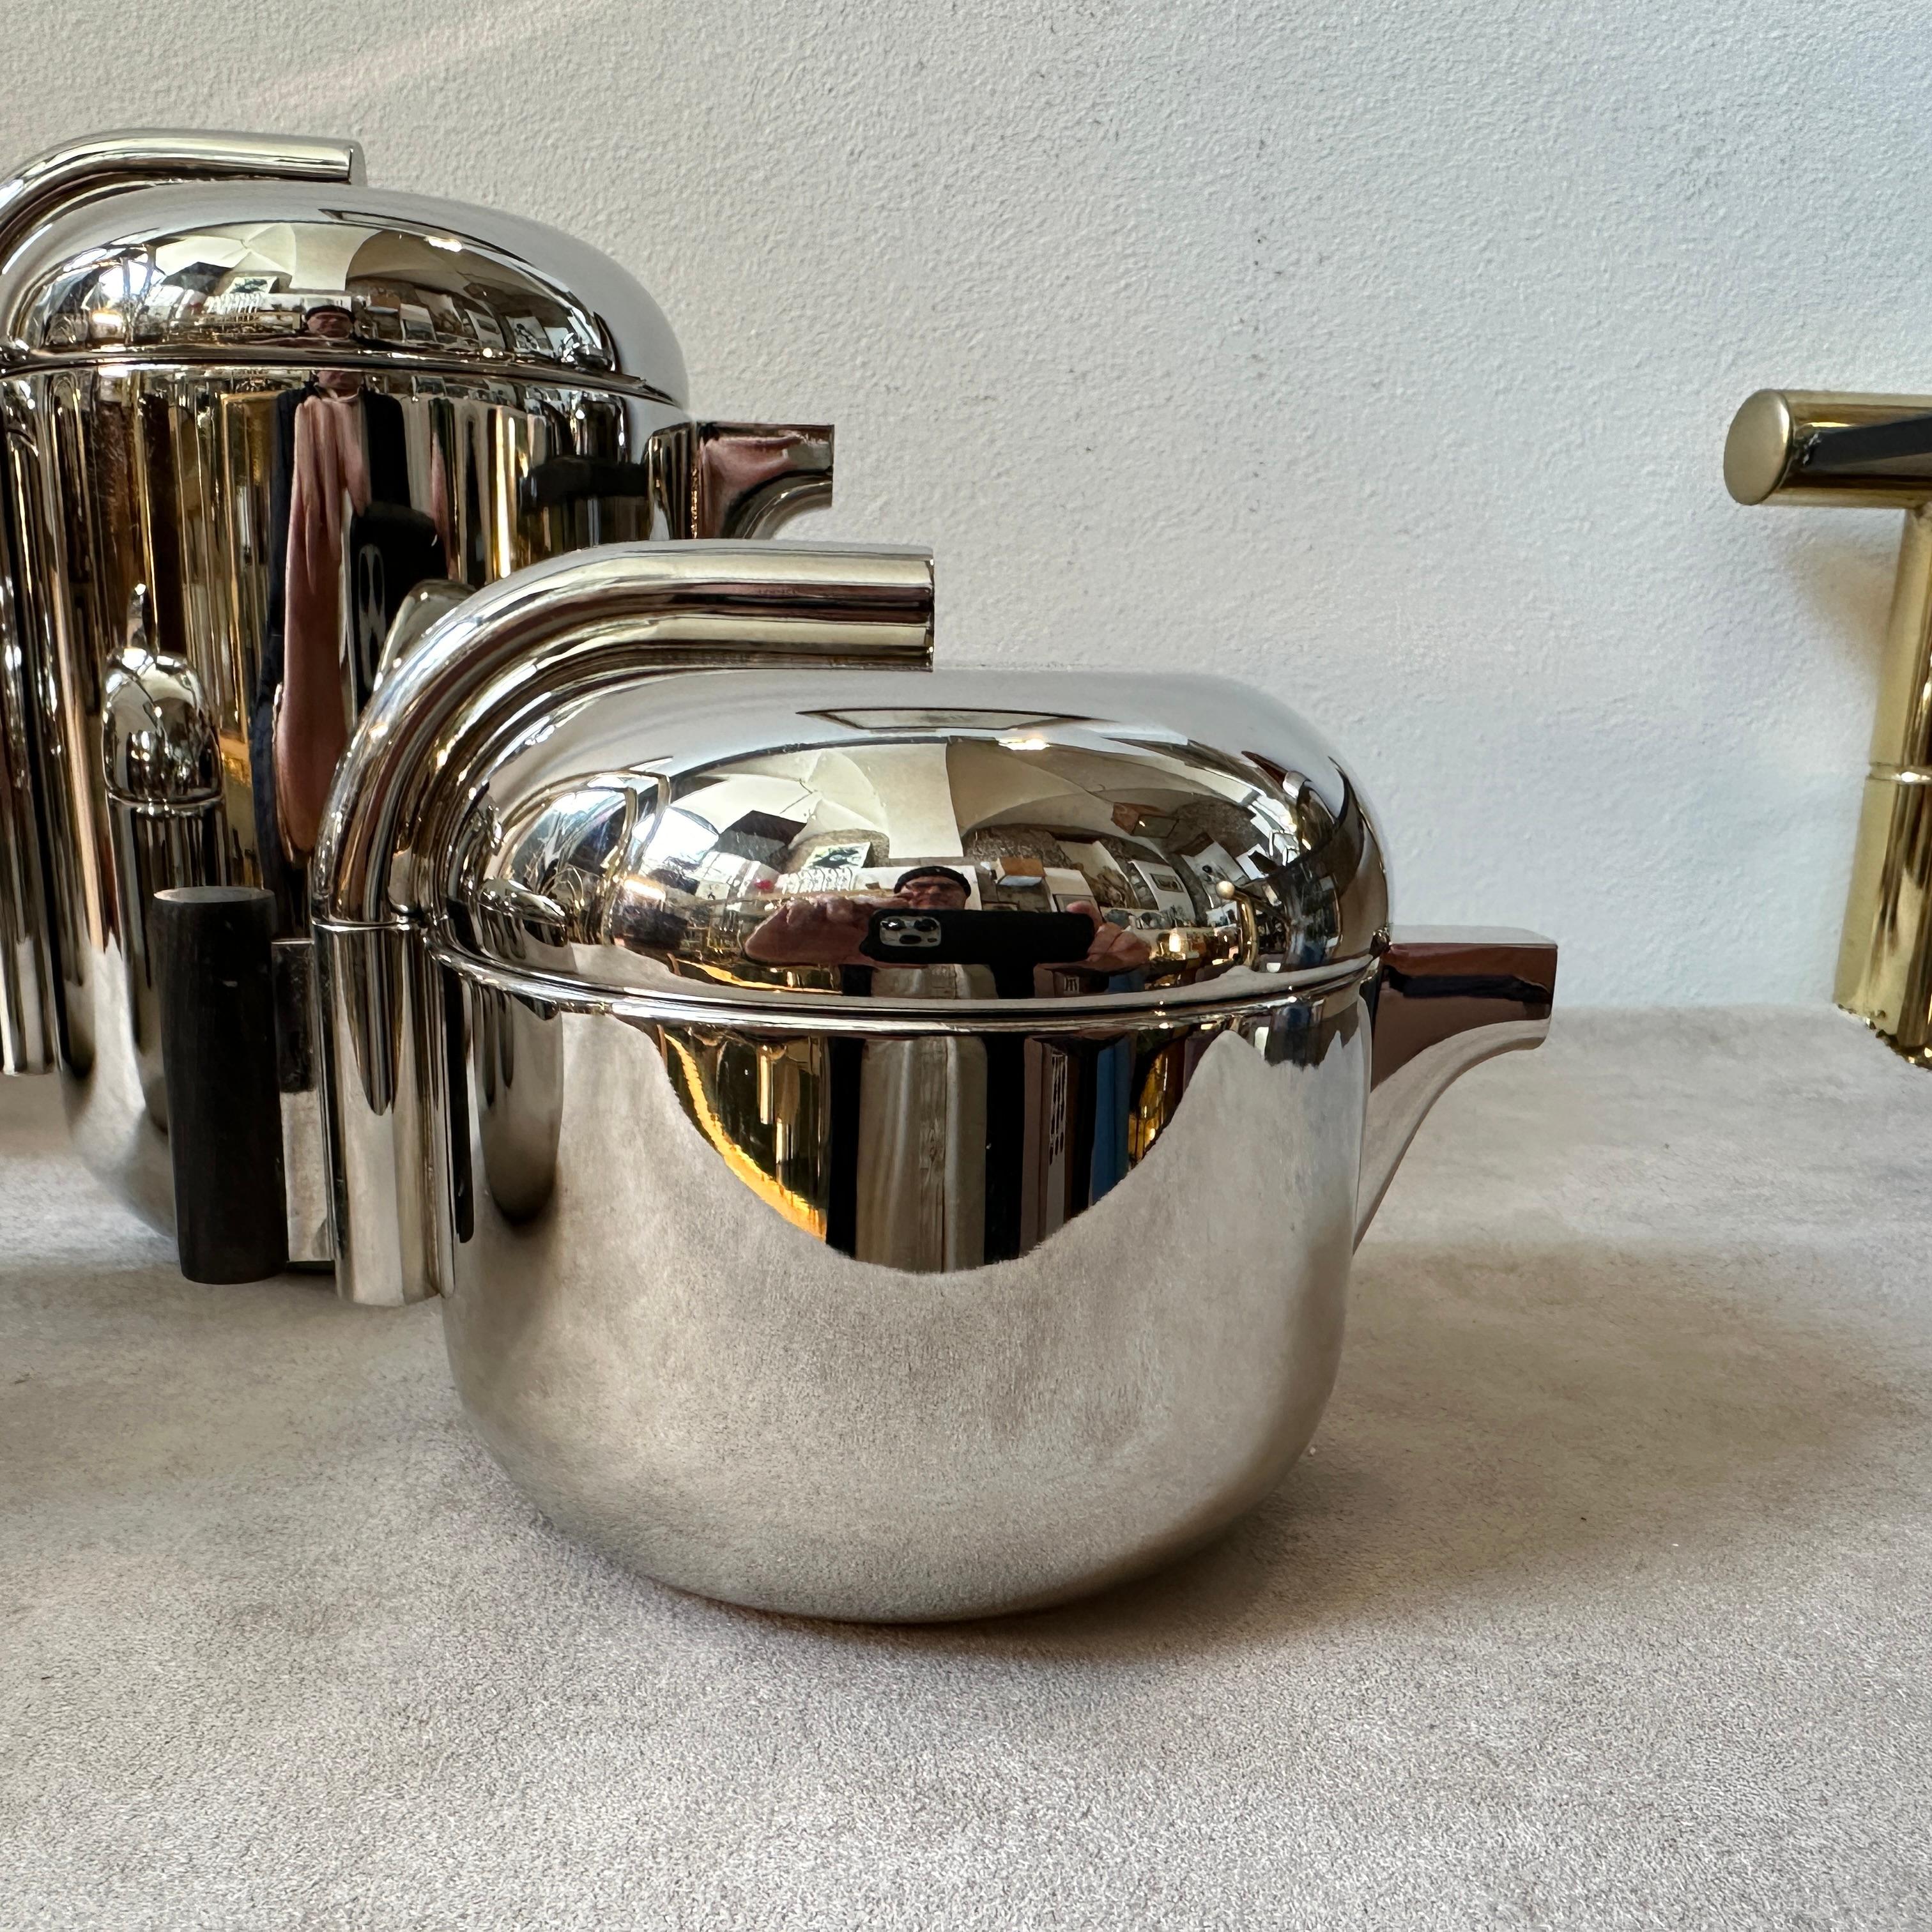 1960s Silver Plated Tea and Coffee Set Designed by G. Coarezza for Mam Milano For Sale 3